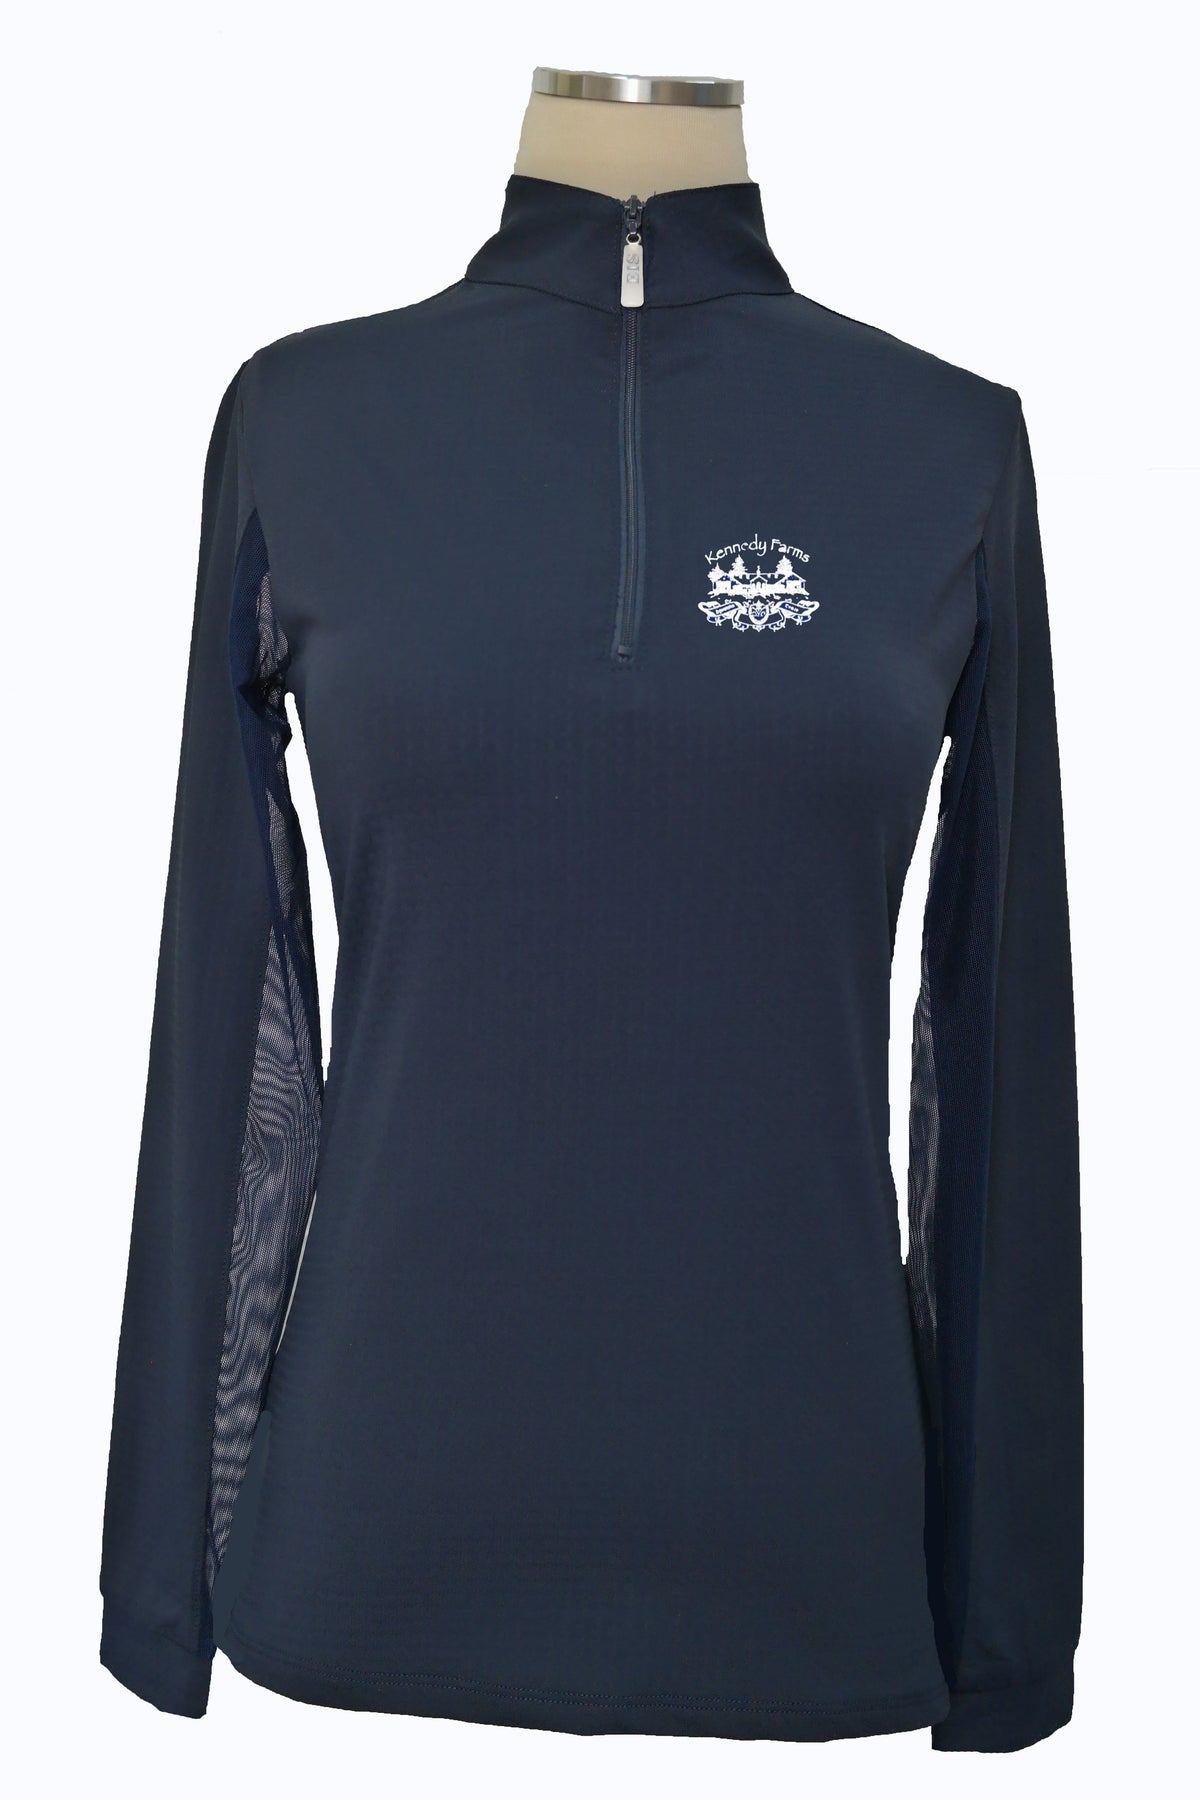 Equestrian Team Apparel Custom Team Shirts Youth / Navy Kennedy Farms Sunshirt equestrian team apparel online tack store mobile tack store custom farm apparel custom show stable clothing equestrian lifestyle horse show clothing riding clothes horses equestrian tack store